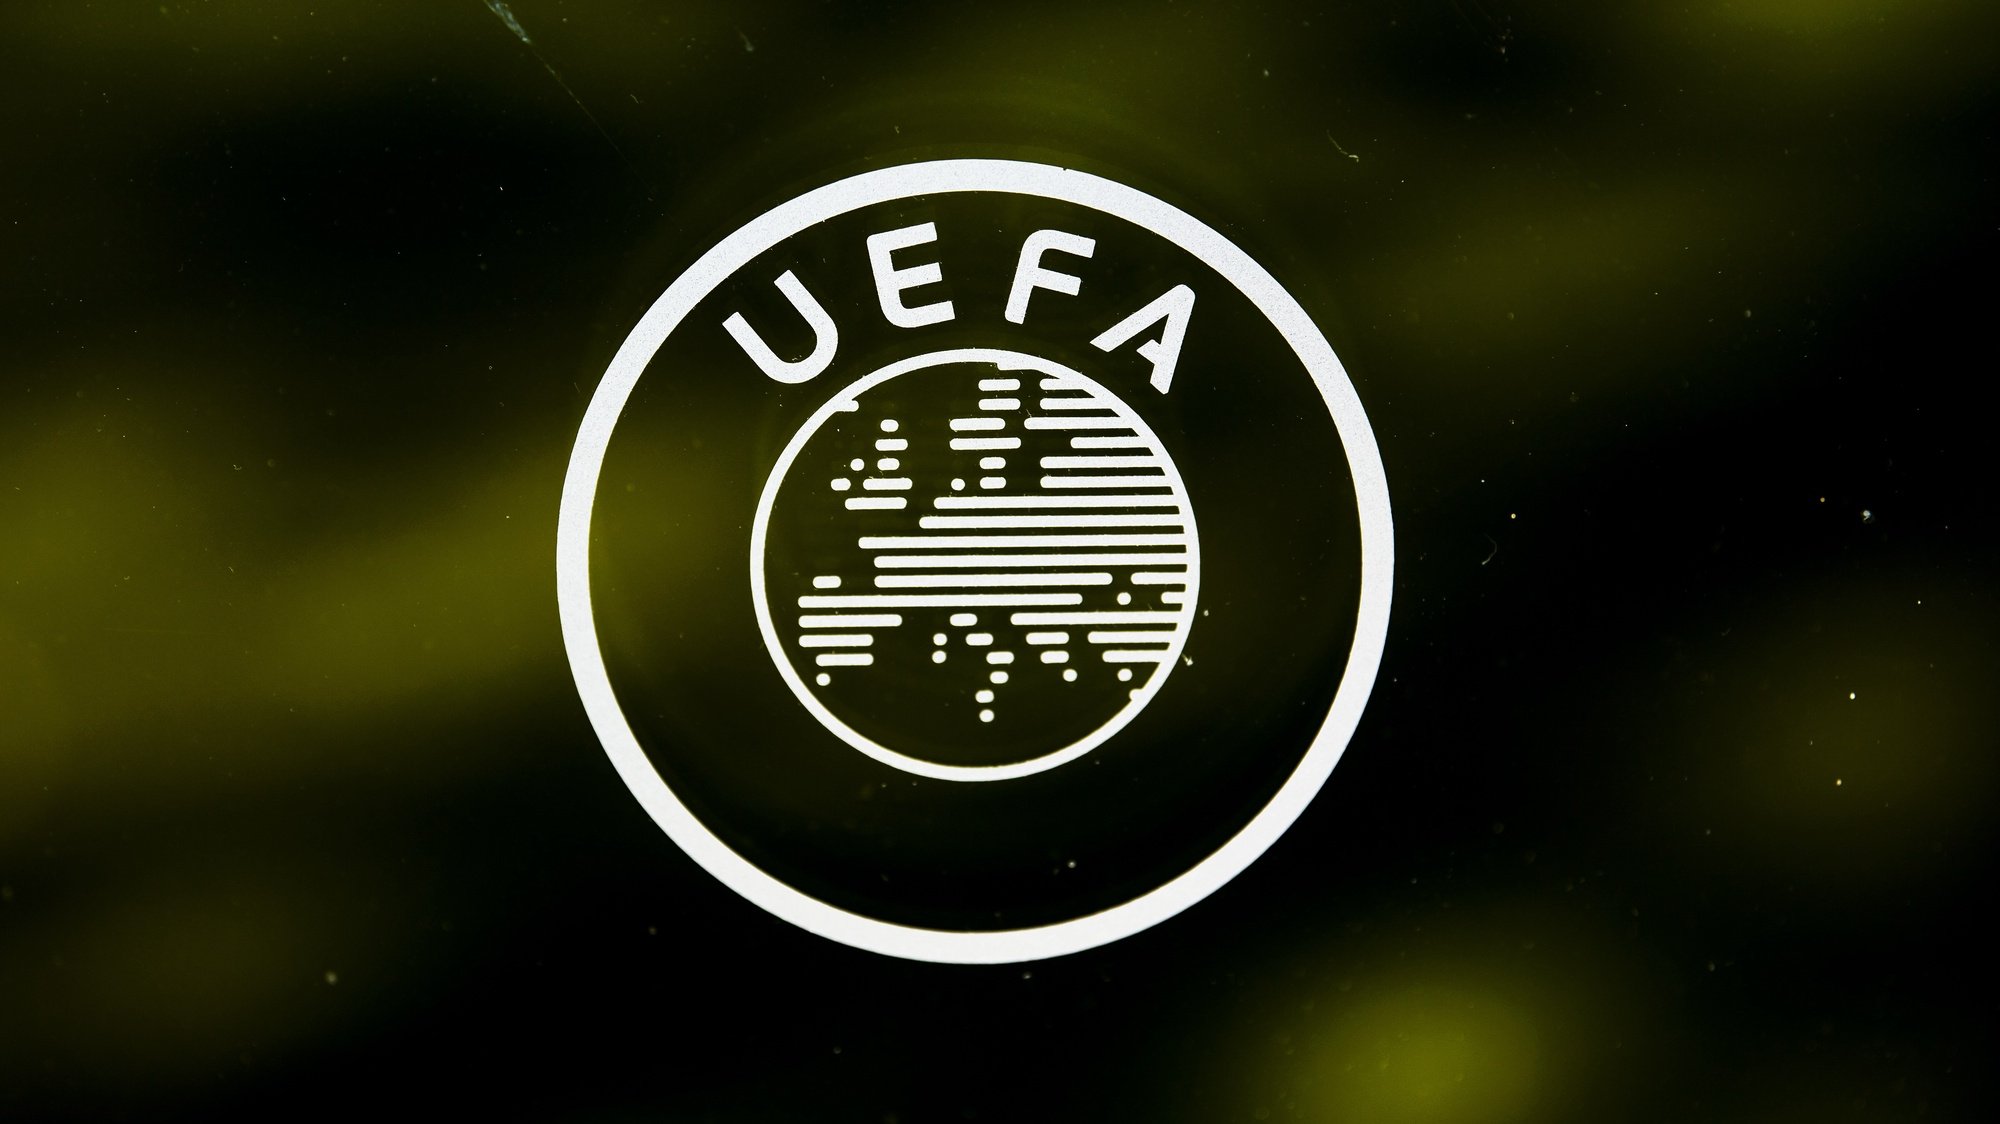 epa08487681 (FILE) - A UEFA logo is pictured through a window prior to the UEFA Europa League 2019/20 Round of 16 draw at the UEFA Headquarters in Nyon, Switzerland, 28 February 2020 (re-issued on 16 June 2020). Lisbon&#039;s Estadio da Luz is expected to host the 2020 UEFA Champions League final in a decision by the UEFA executive committee set to be announced on 17 June 2020.  EPA/JEAN-CHRISTOPHE BOTT *** Local Caption *** 55993945